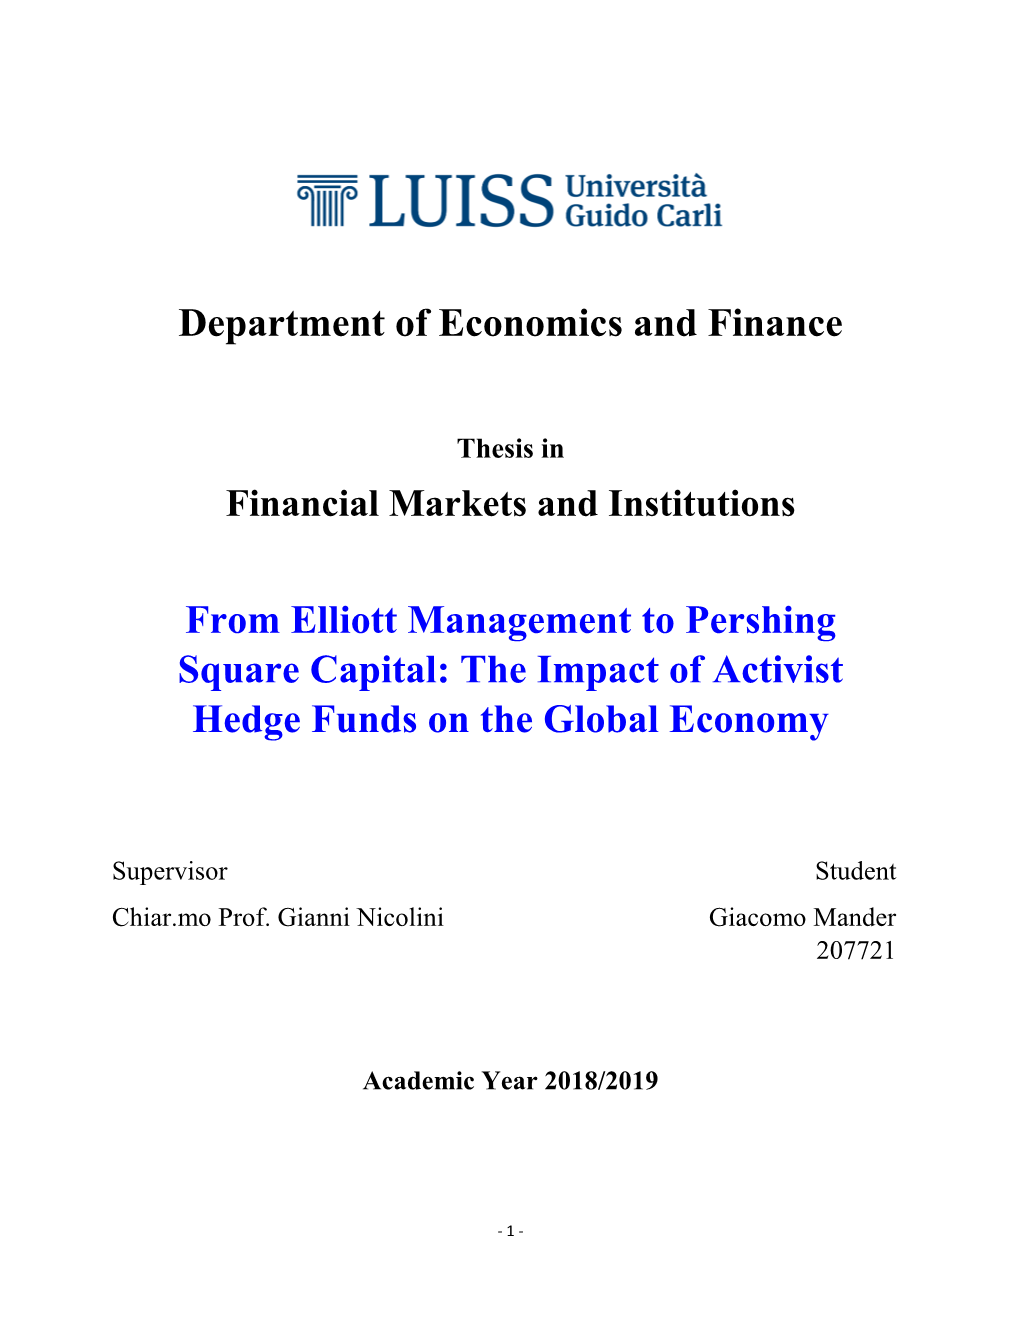 Department of Economics and Finance from Elliott Management